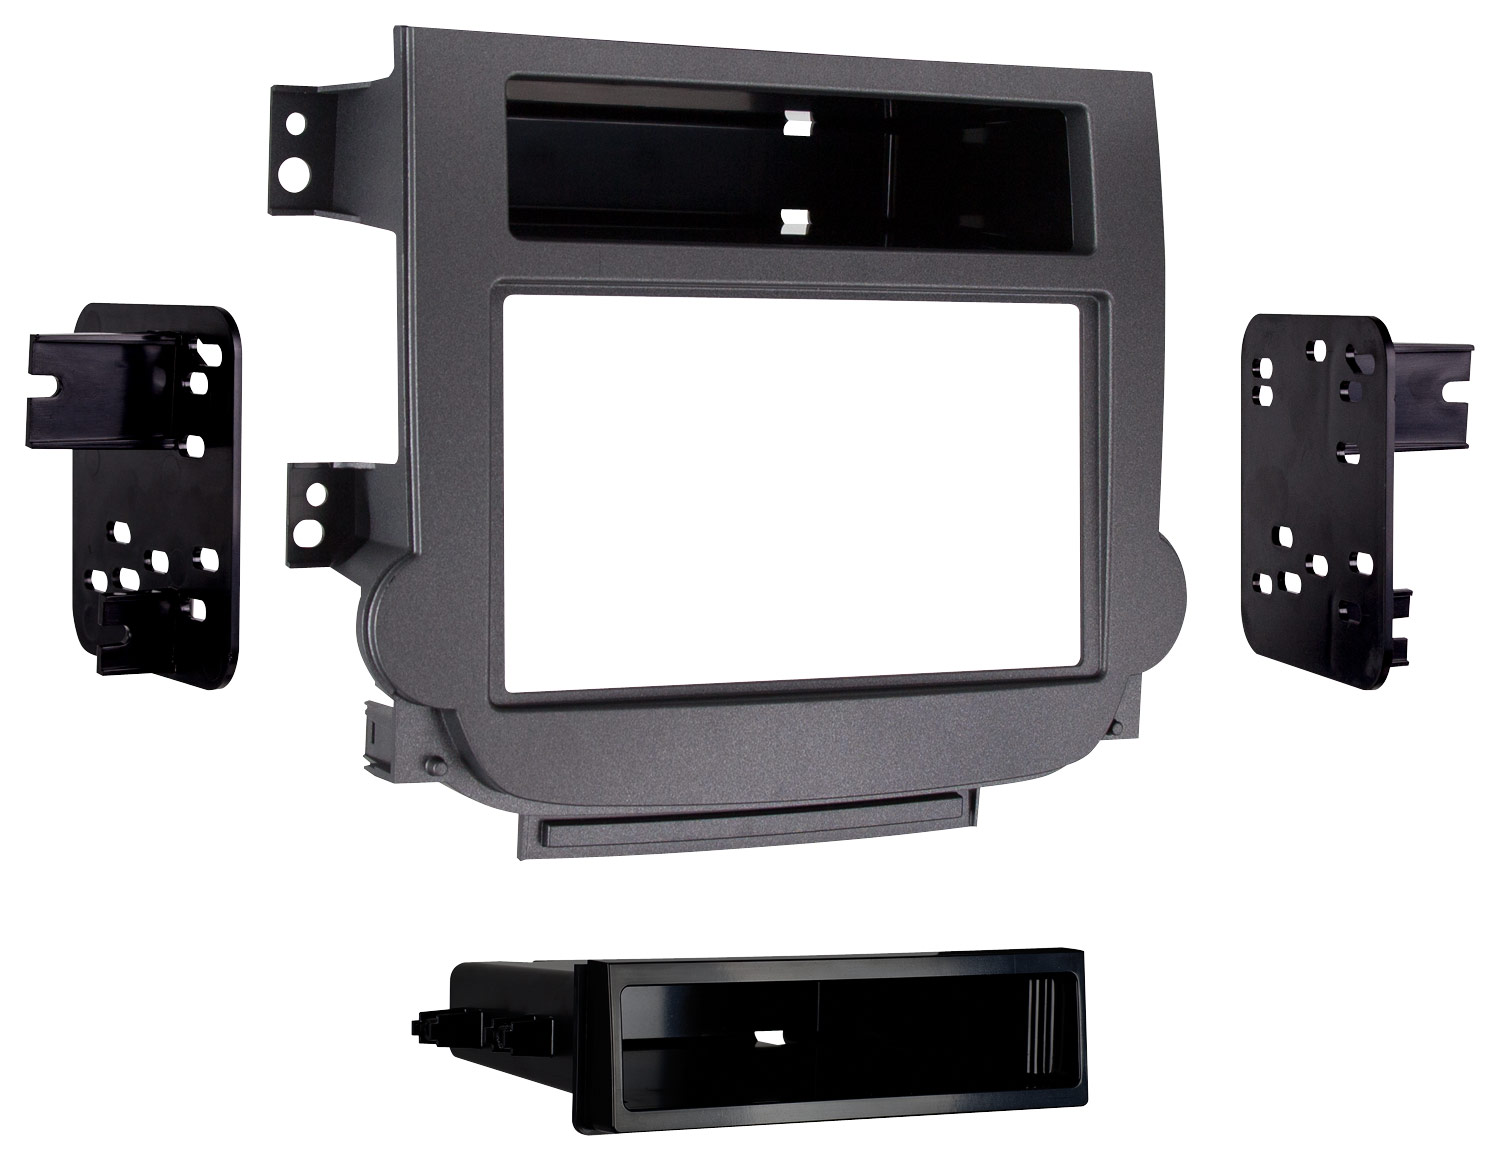 Metra 99-3314G Double DIN Dash Install Kit for Select 2013-Up Chevy Malibu 